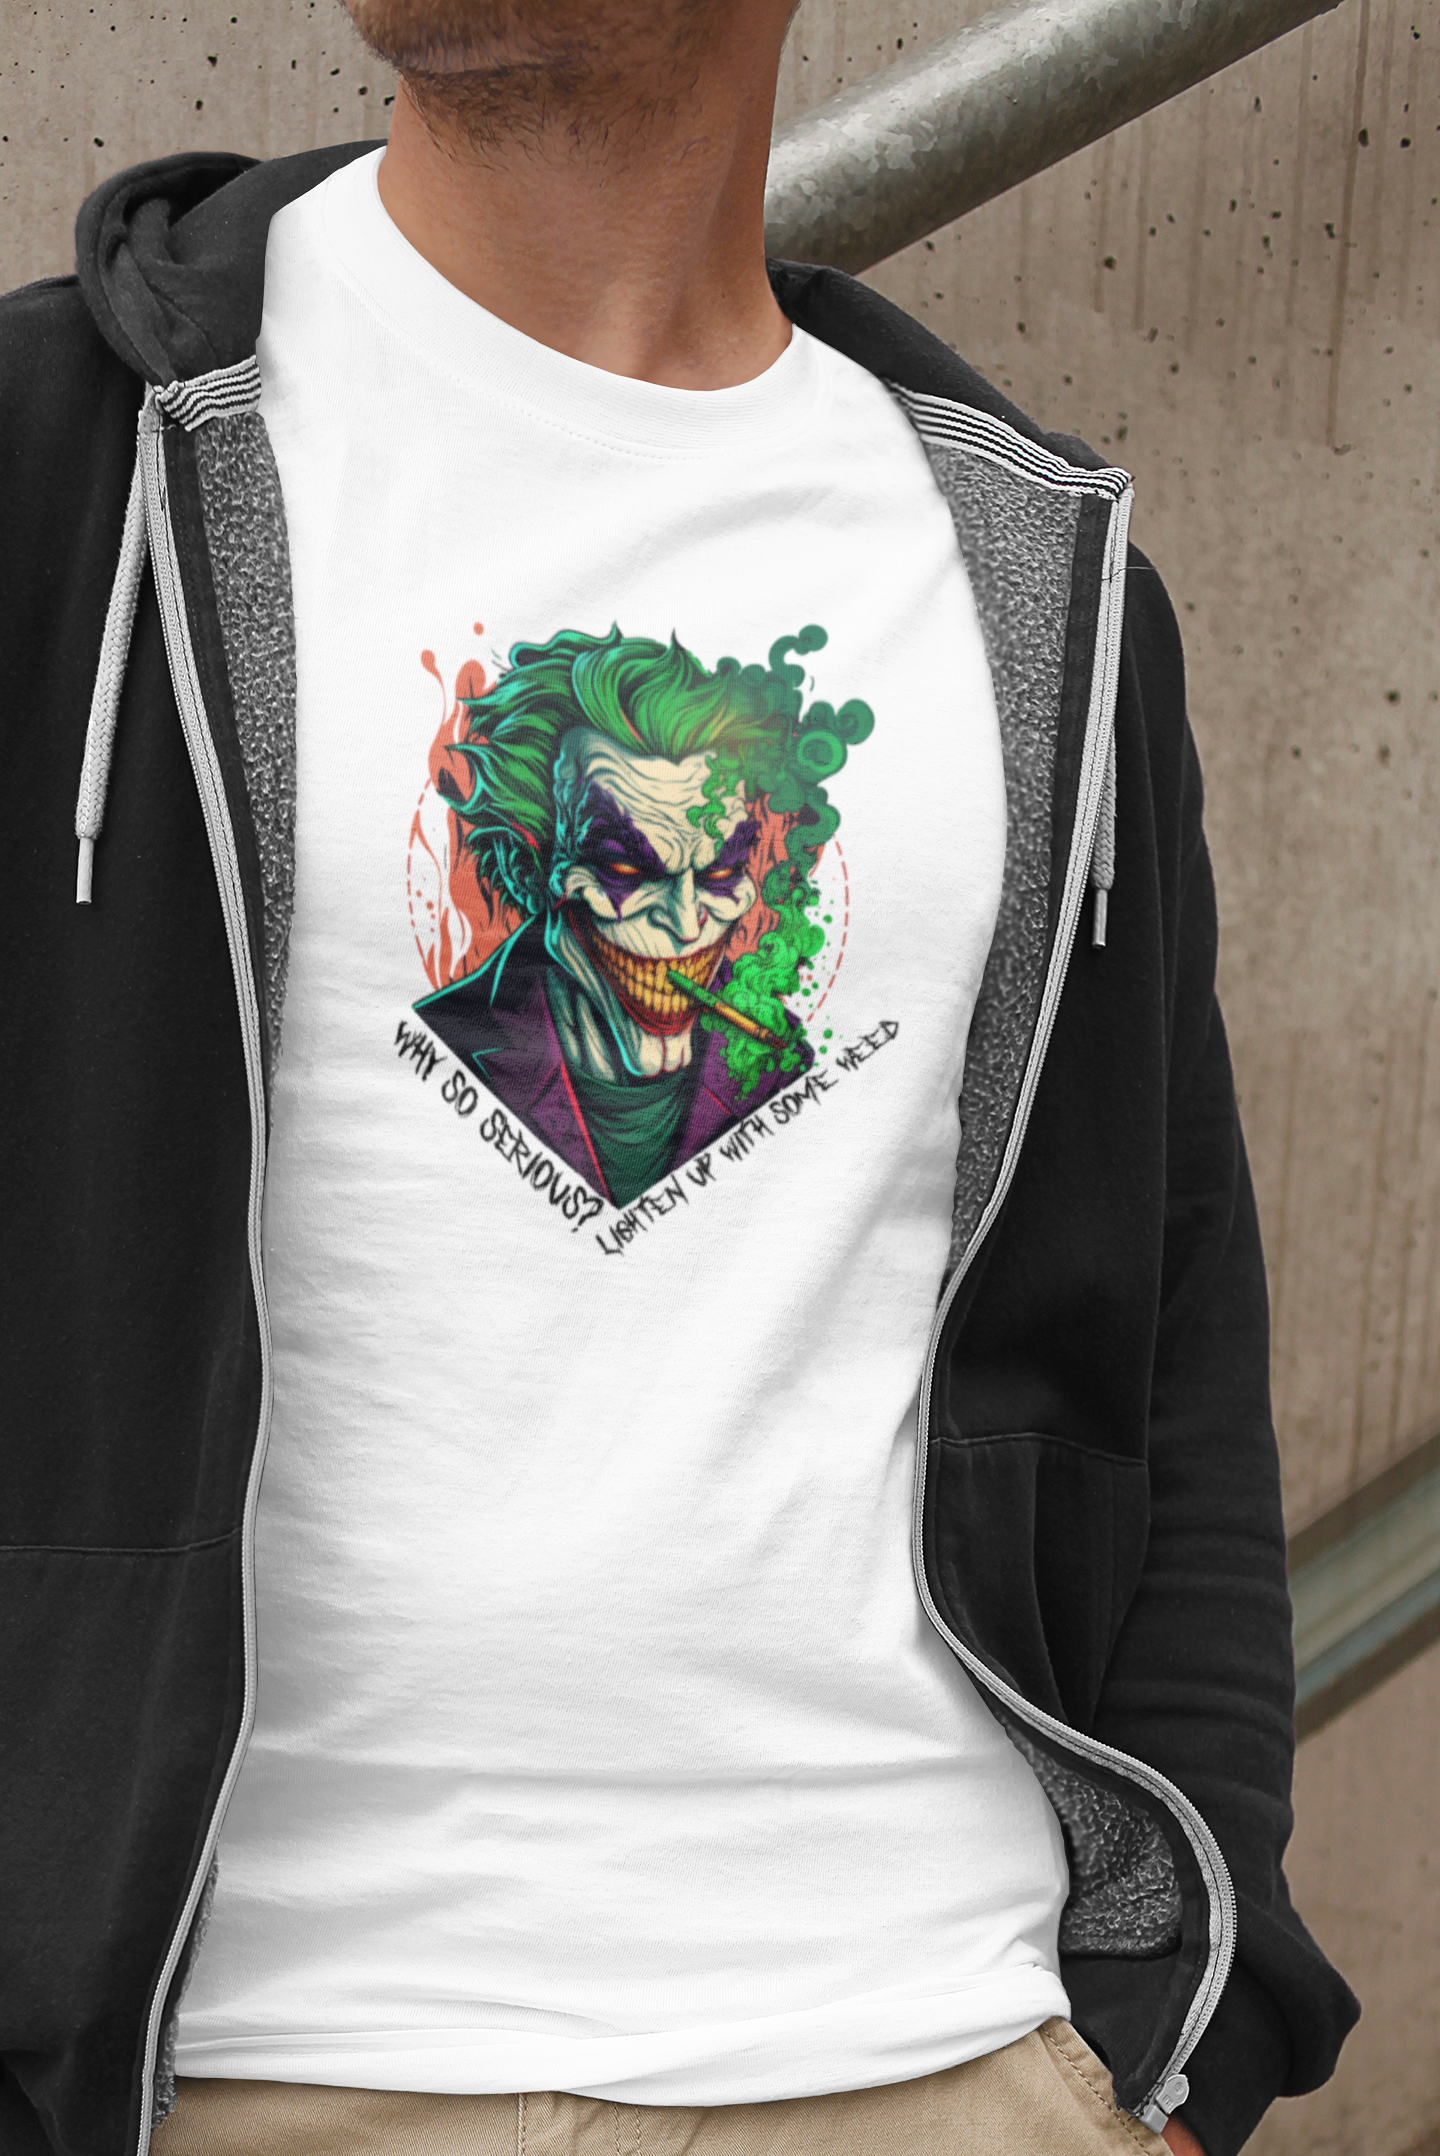 Why so serious? lighten up with some weed.